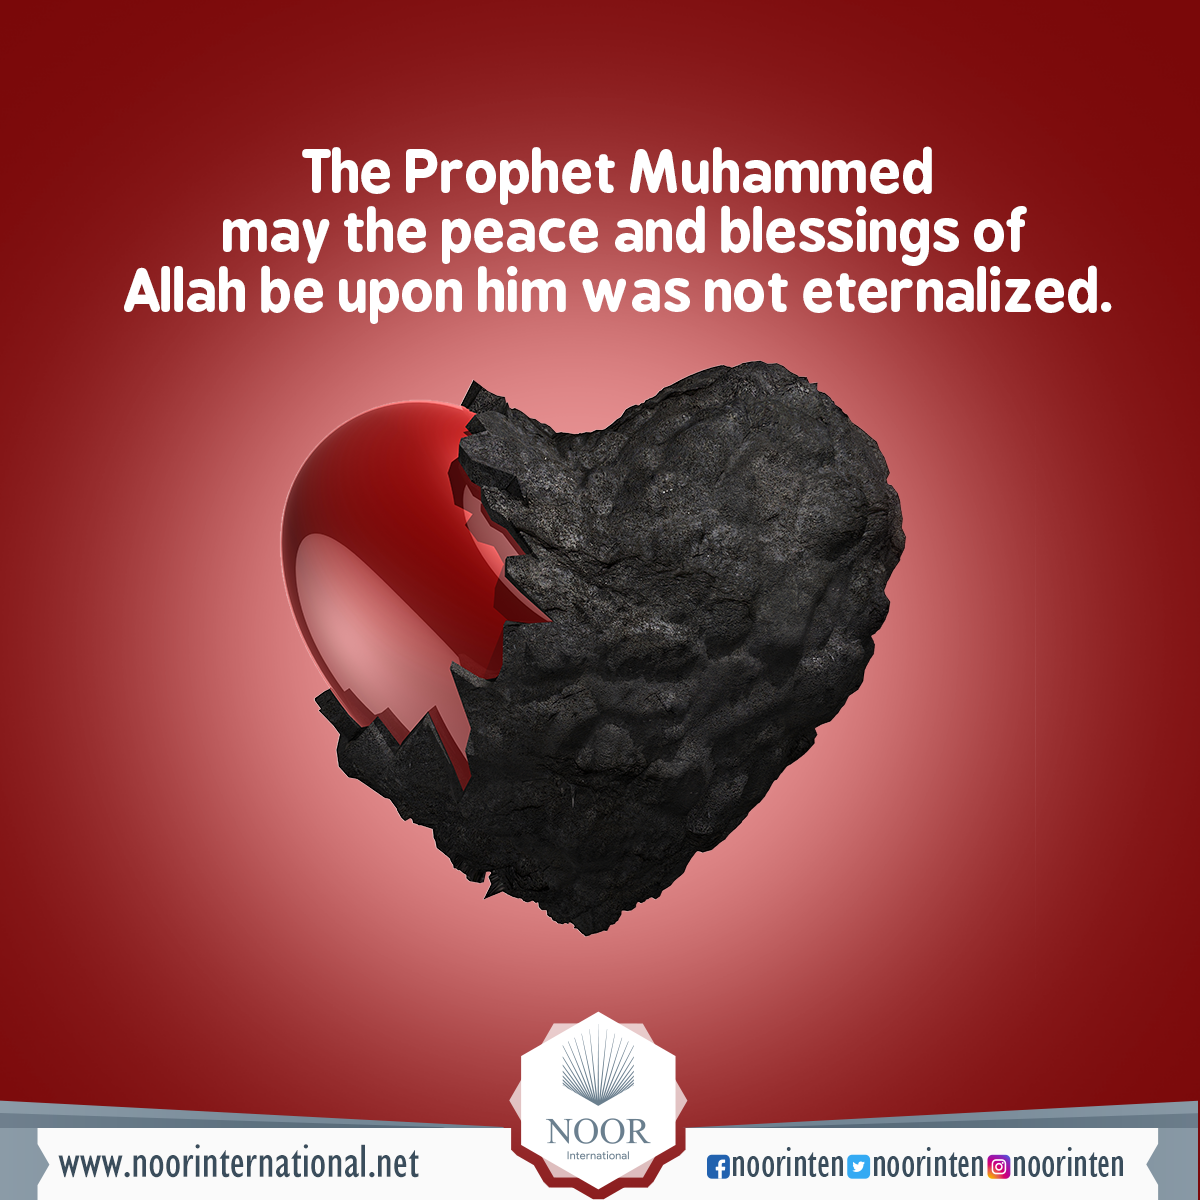 The Prophet Muhammed, may the peace and blessings of Allah be upon him, was not eternalized.